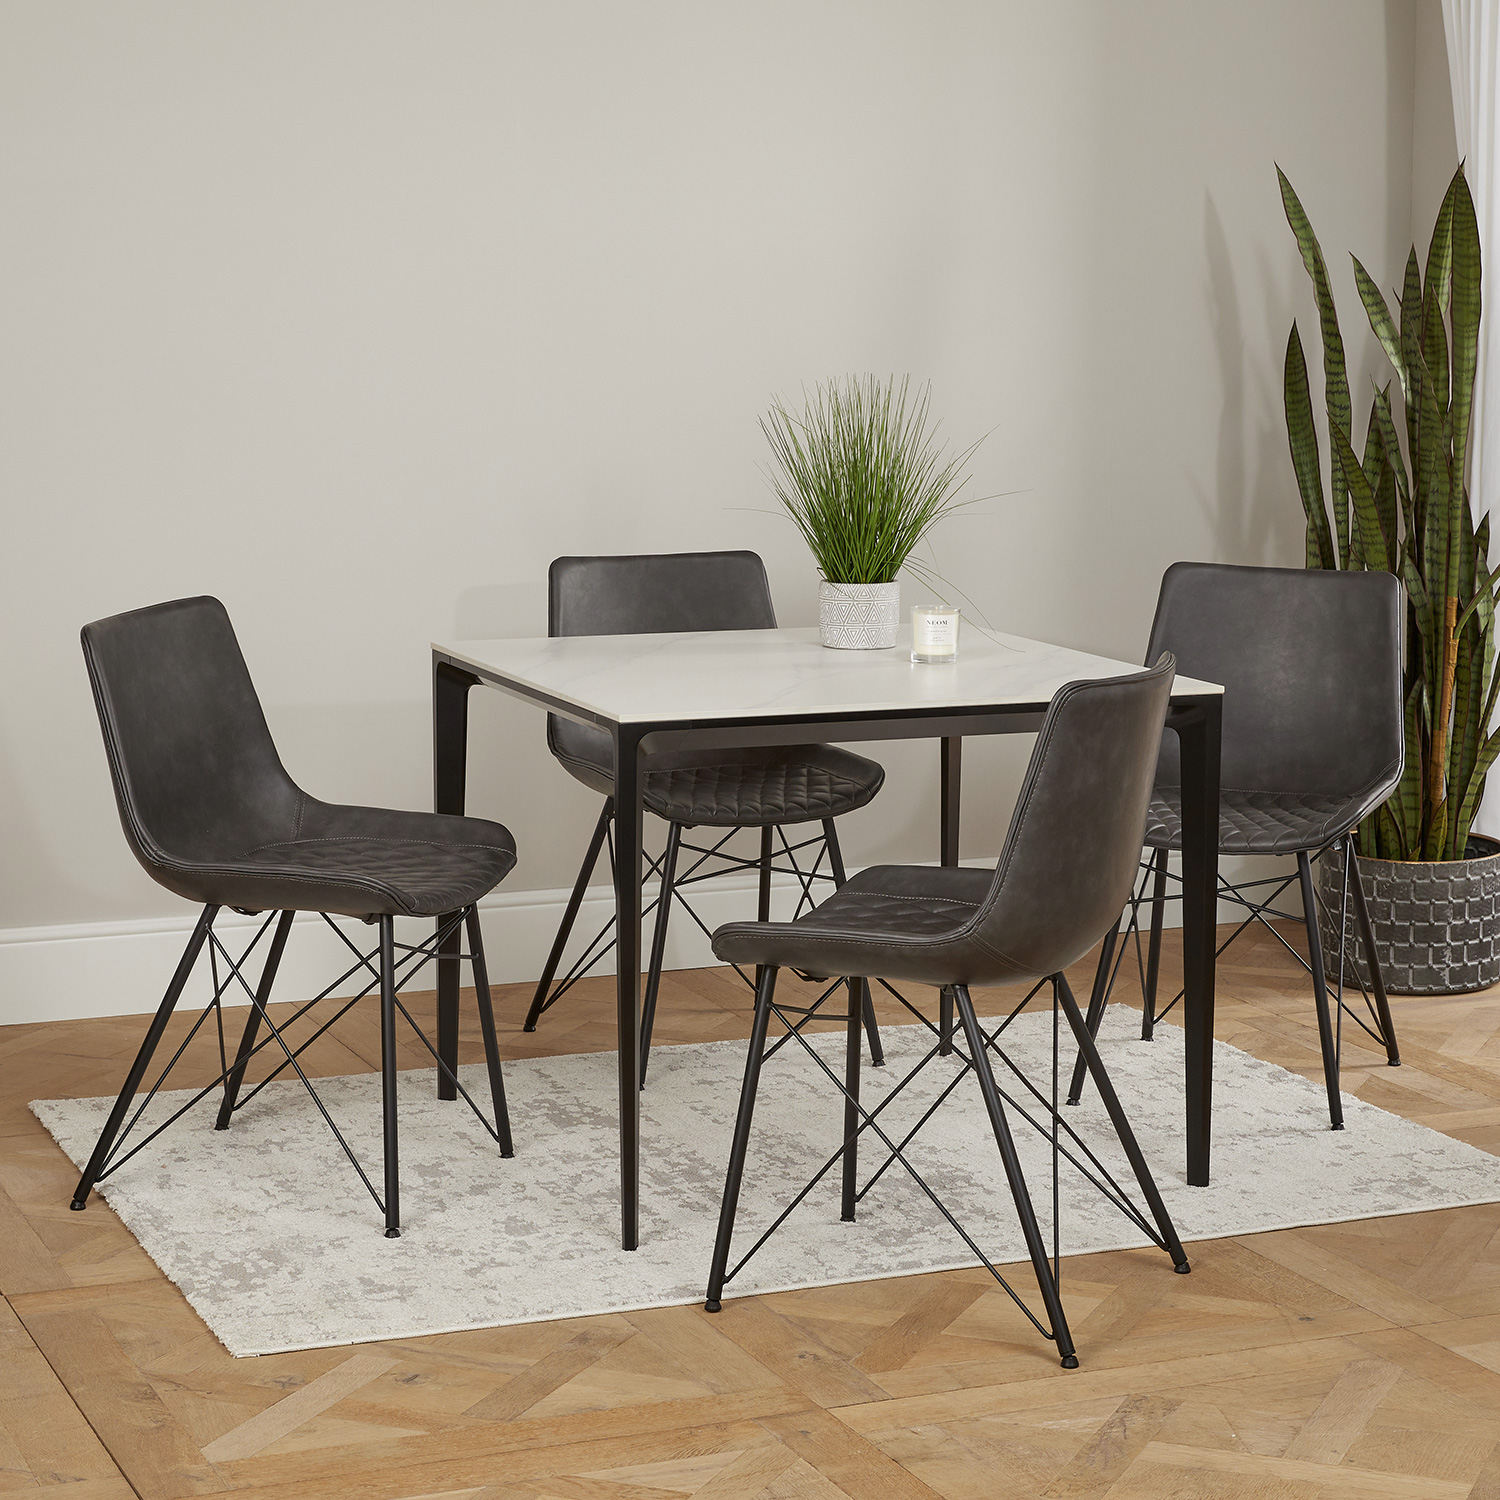 Bellagio 90cm SquareWhite Sintered Stone Dining Table Set with 4 x Leon Grey Dining Chairs